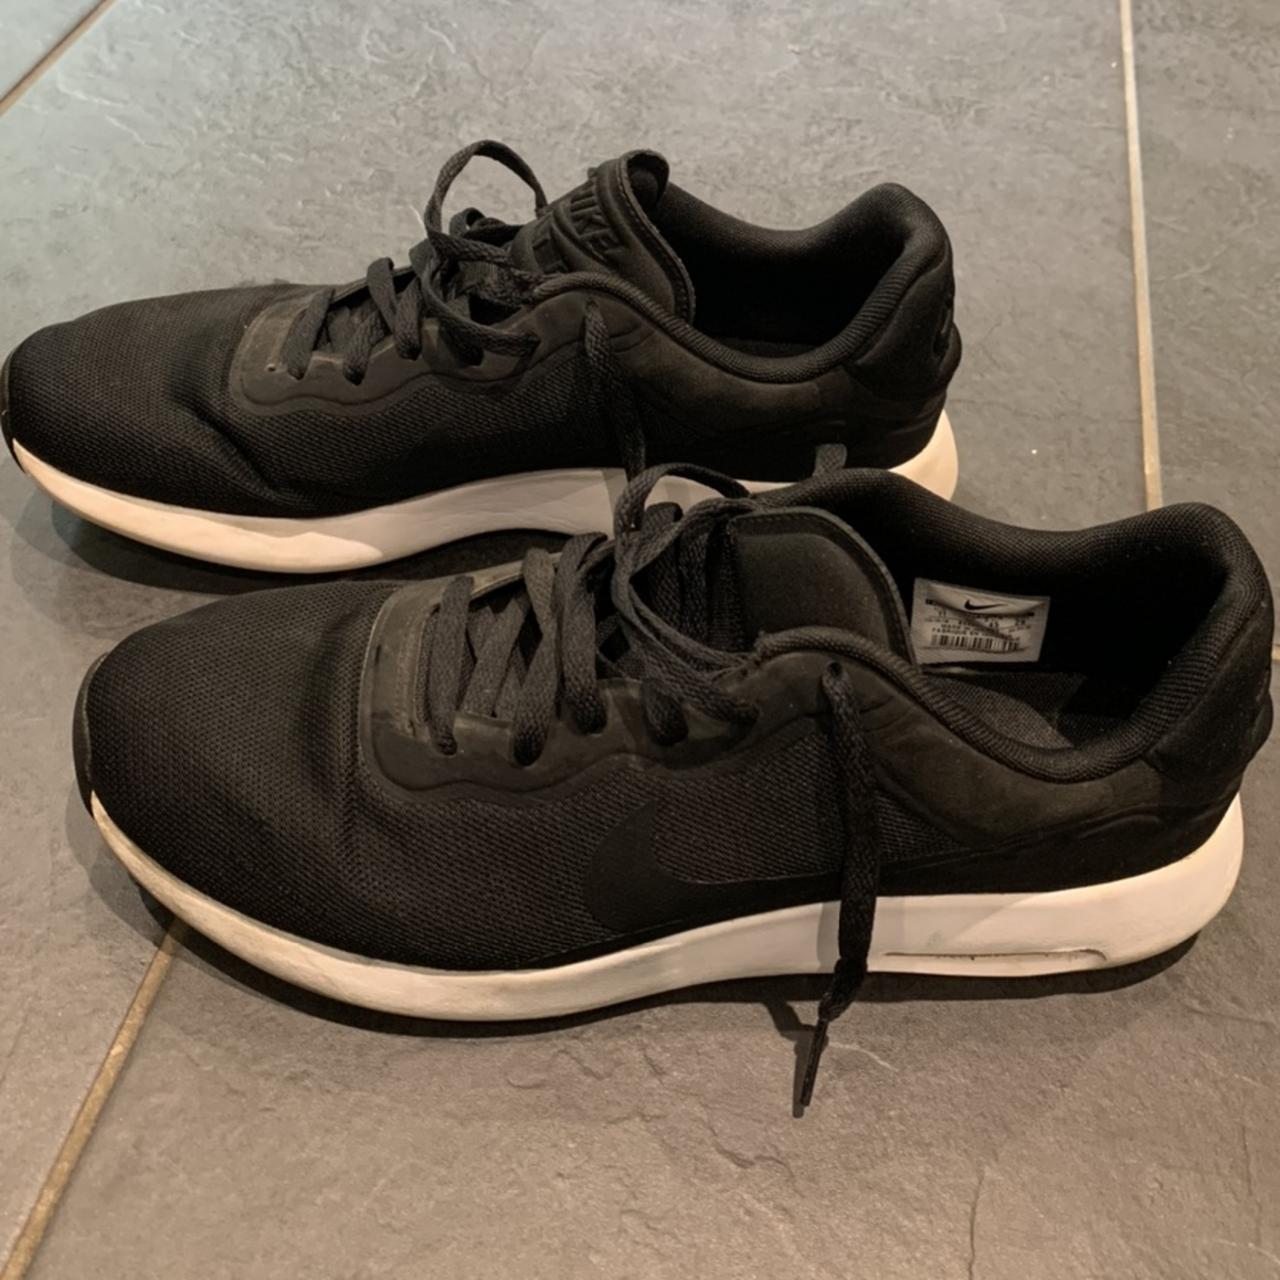 BLACK NIKE TRAINERS WITH WHITE SOLE 👟 only worn a... - Depop